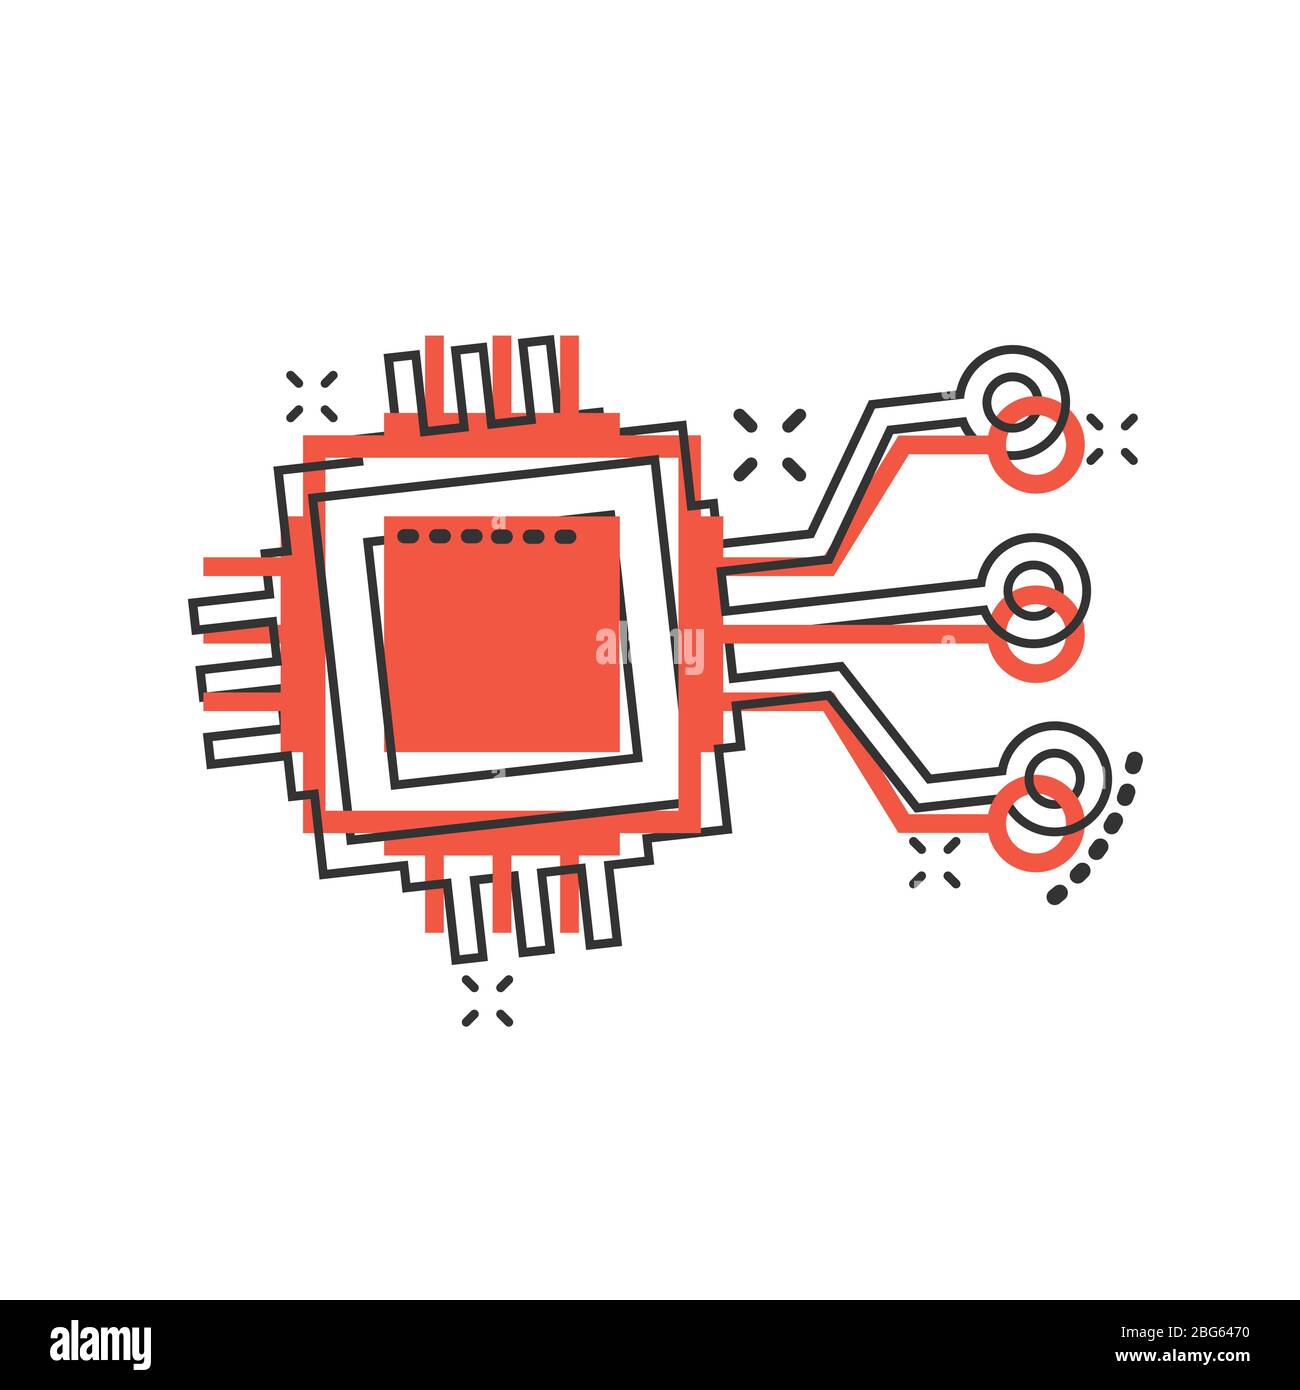 Computer chip icon in comic style. Circuit board cartoon vector illustration on white isolated background. Cpu processor splash effect business concep Stock Vector